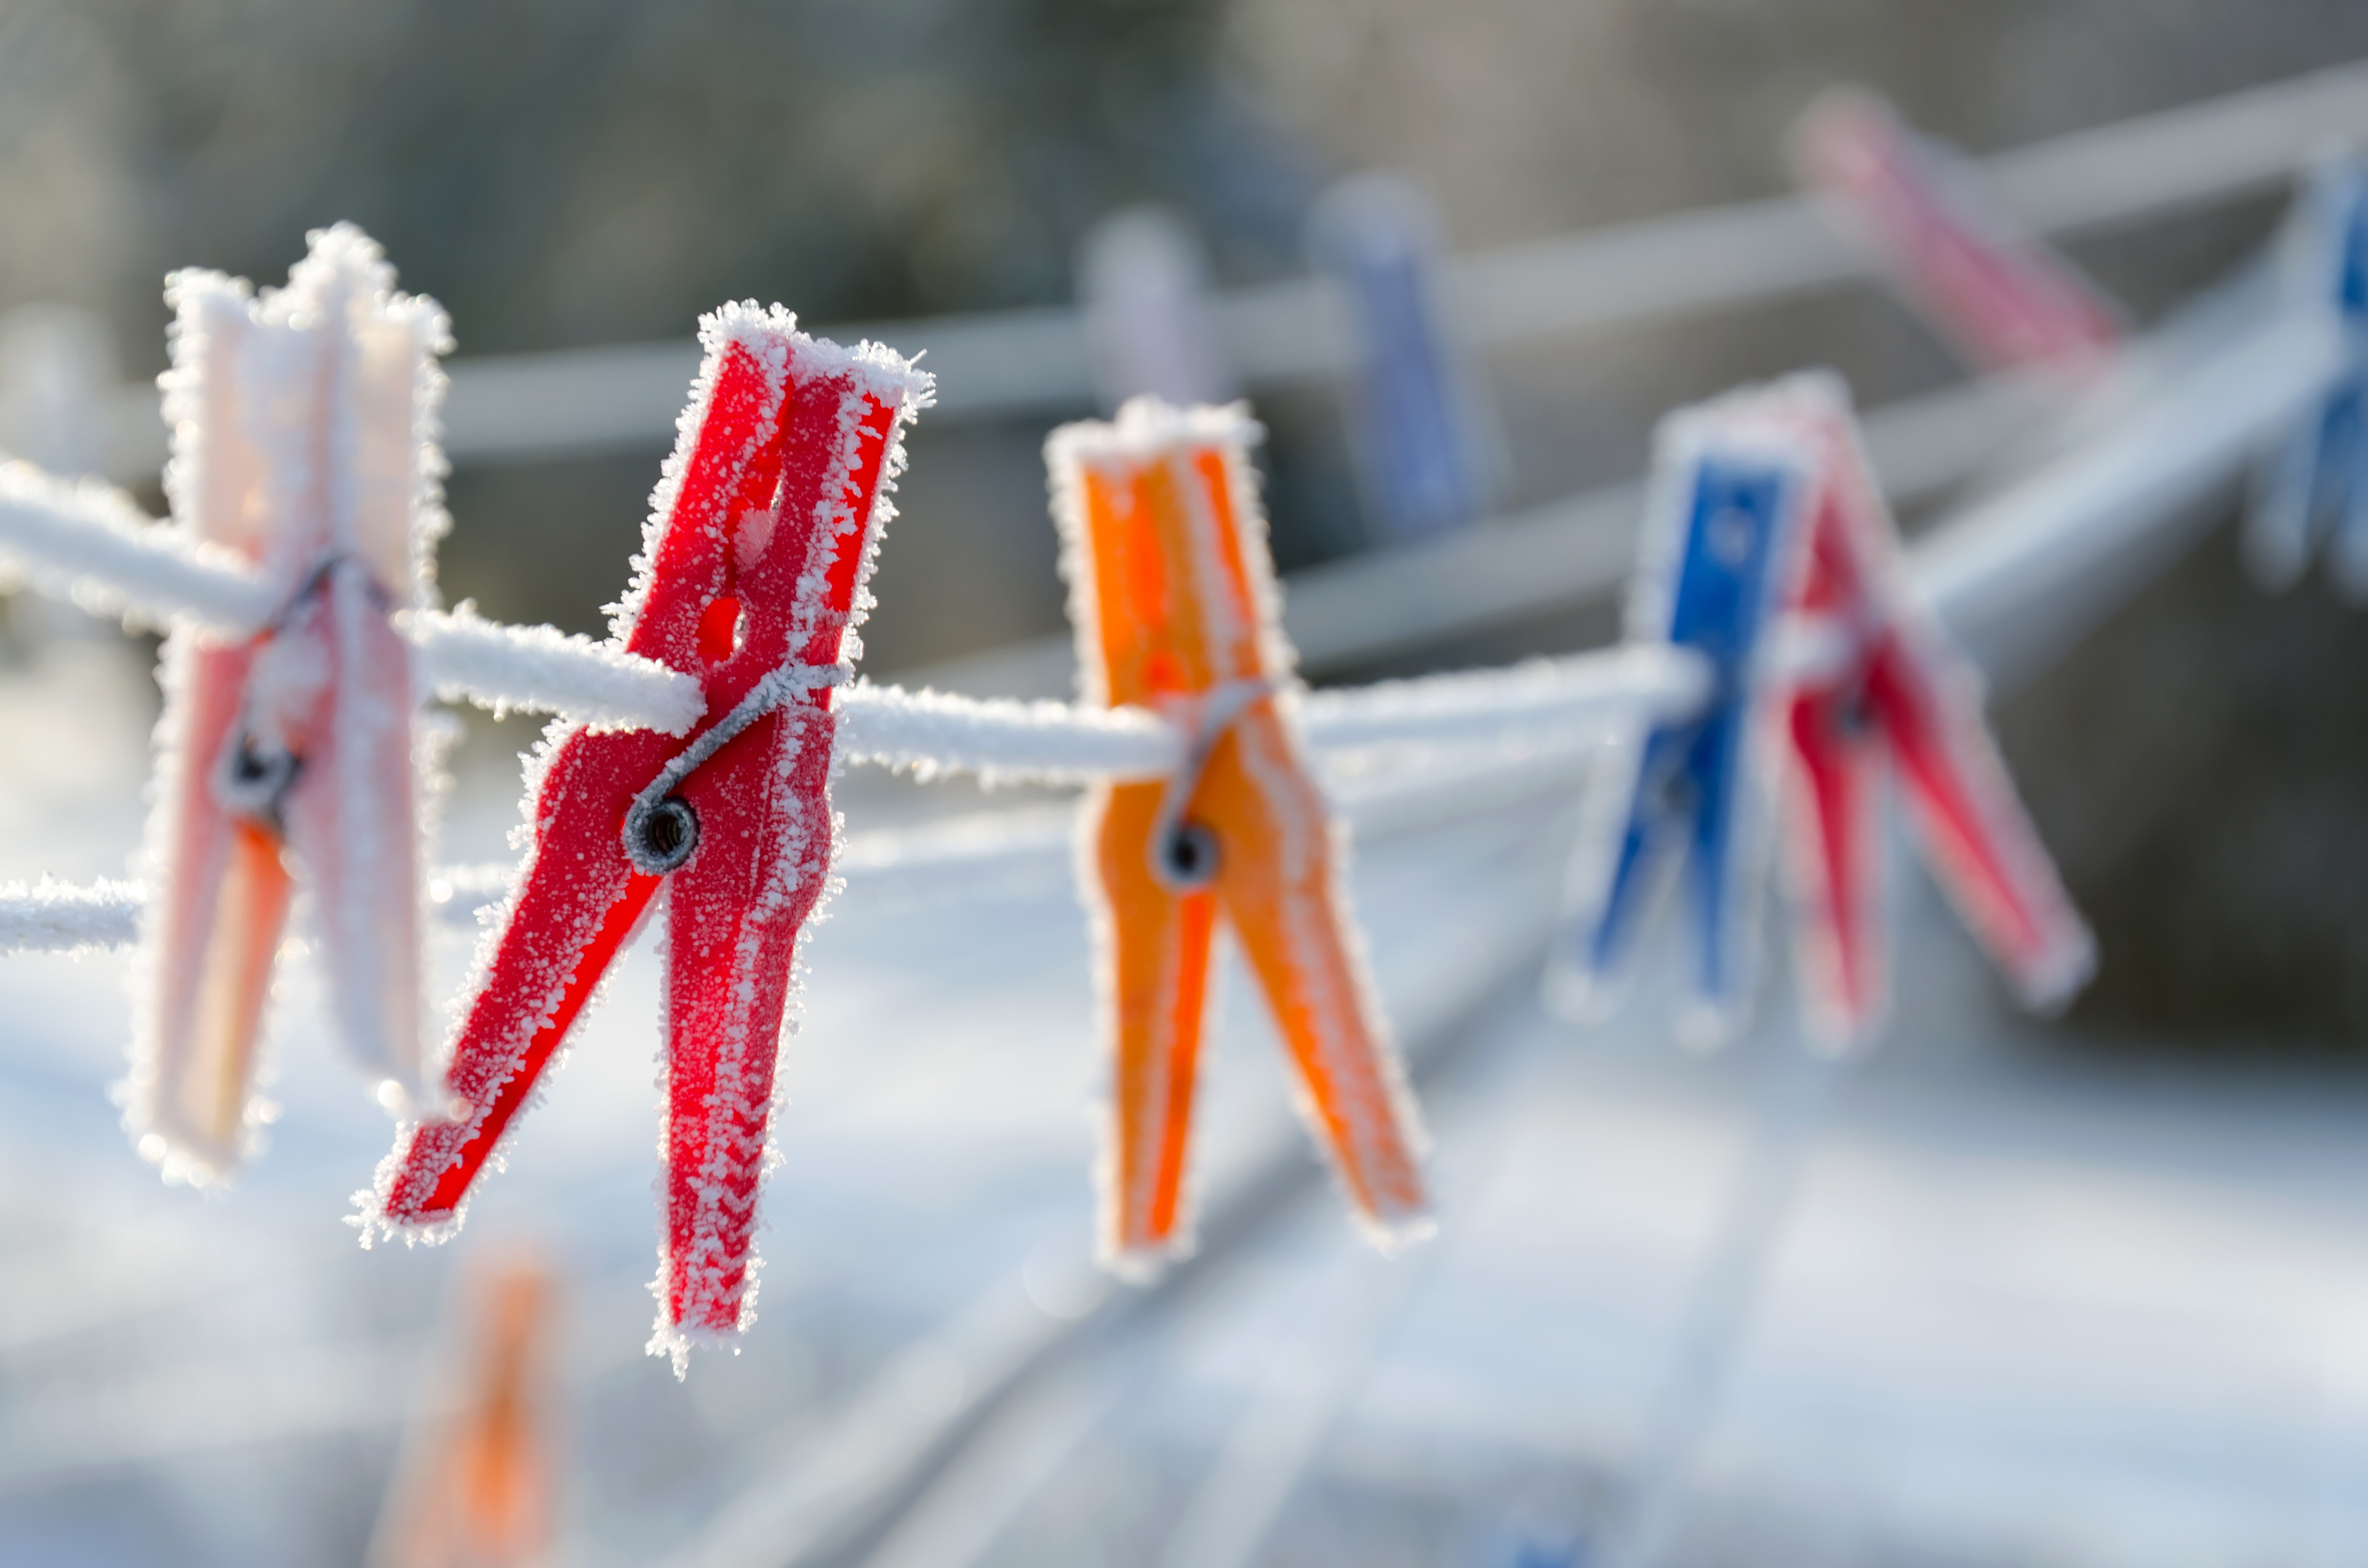 How to dry clothes properly in winter or when it's raining